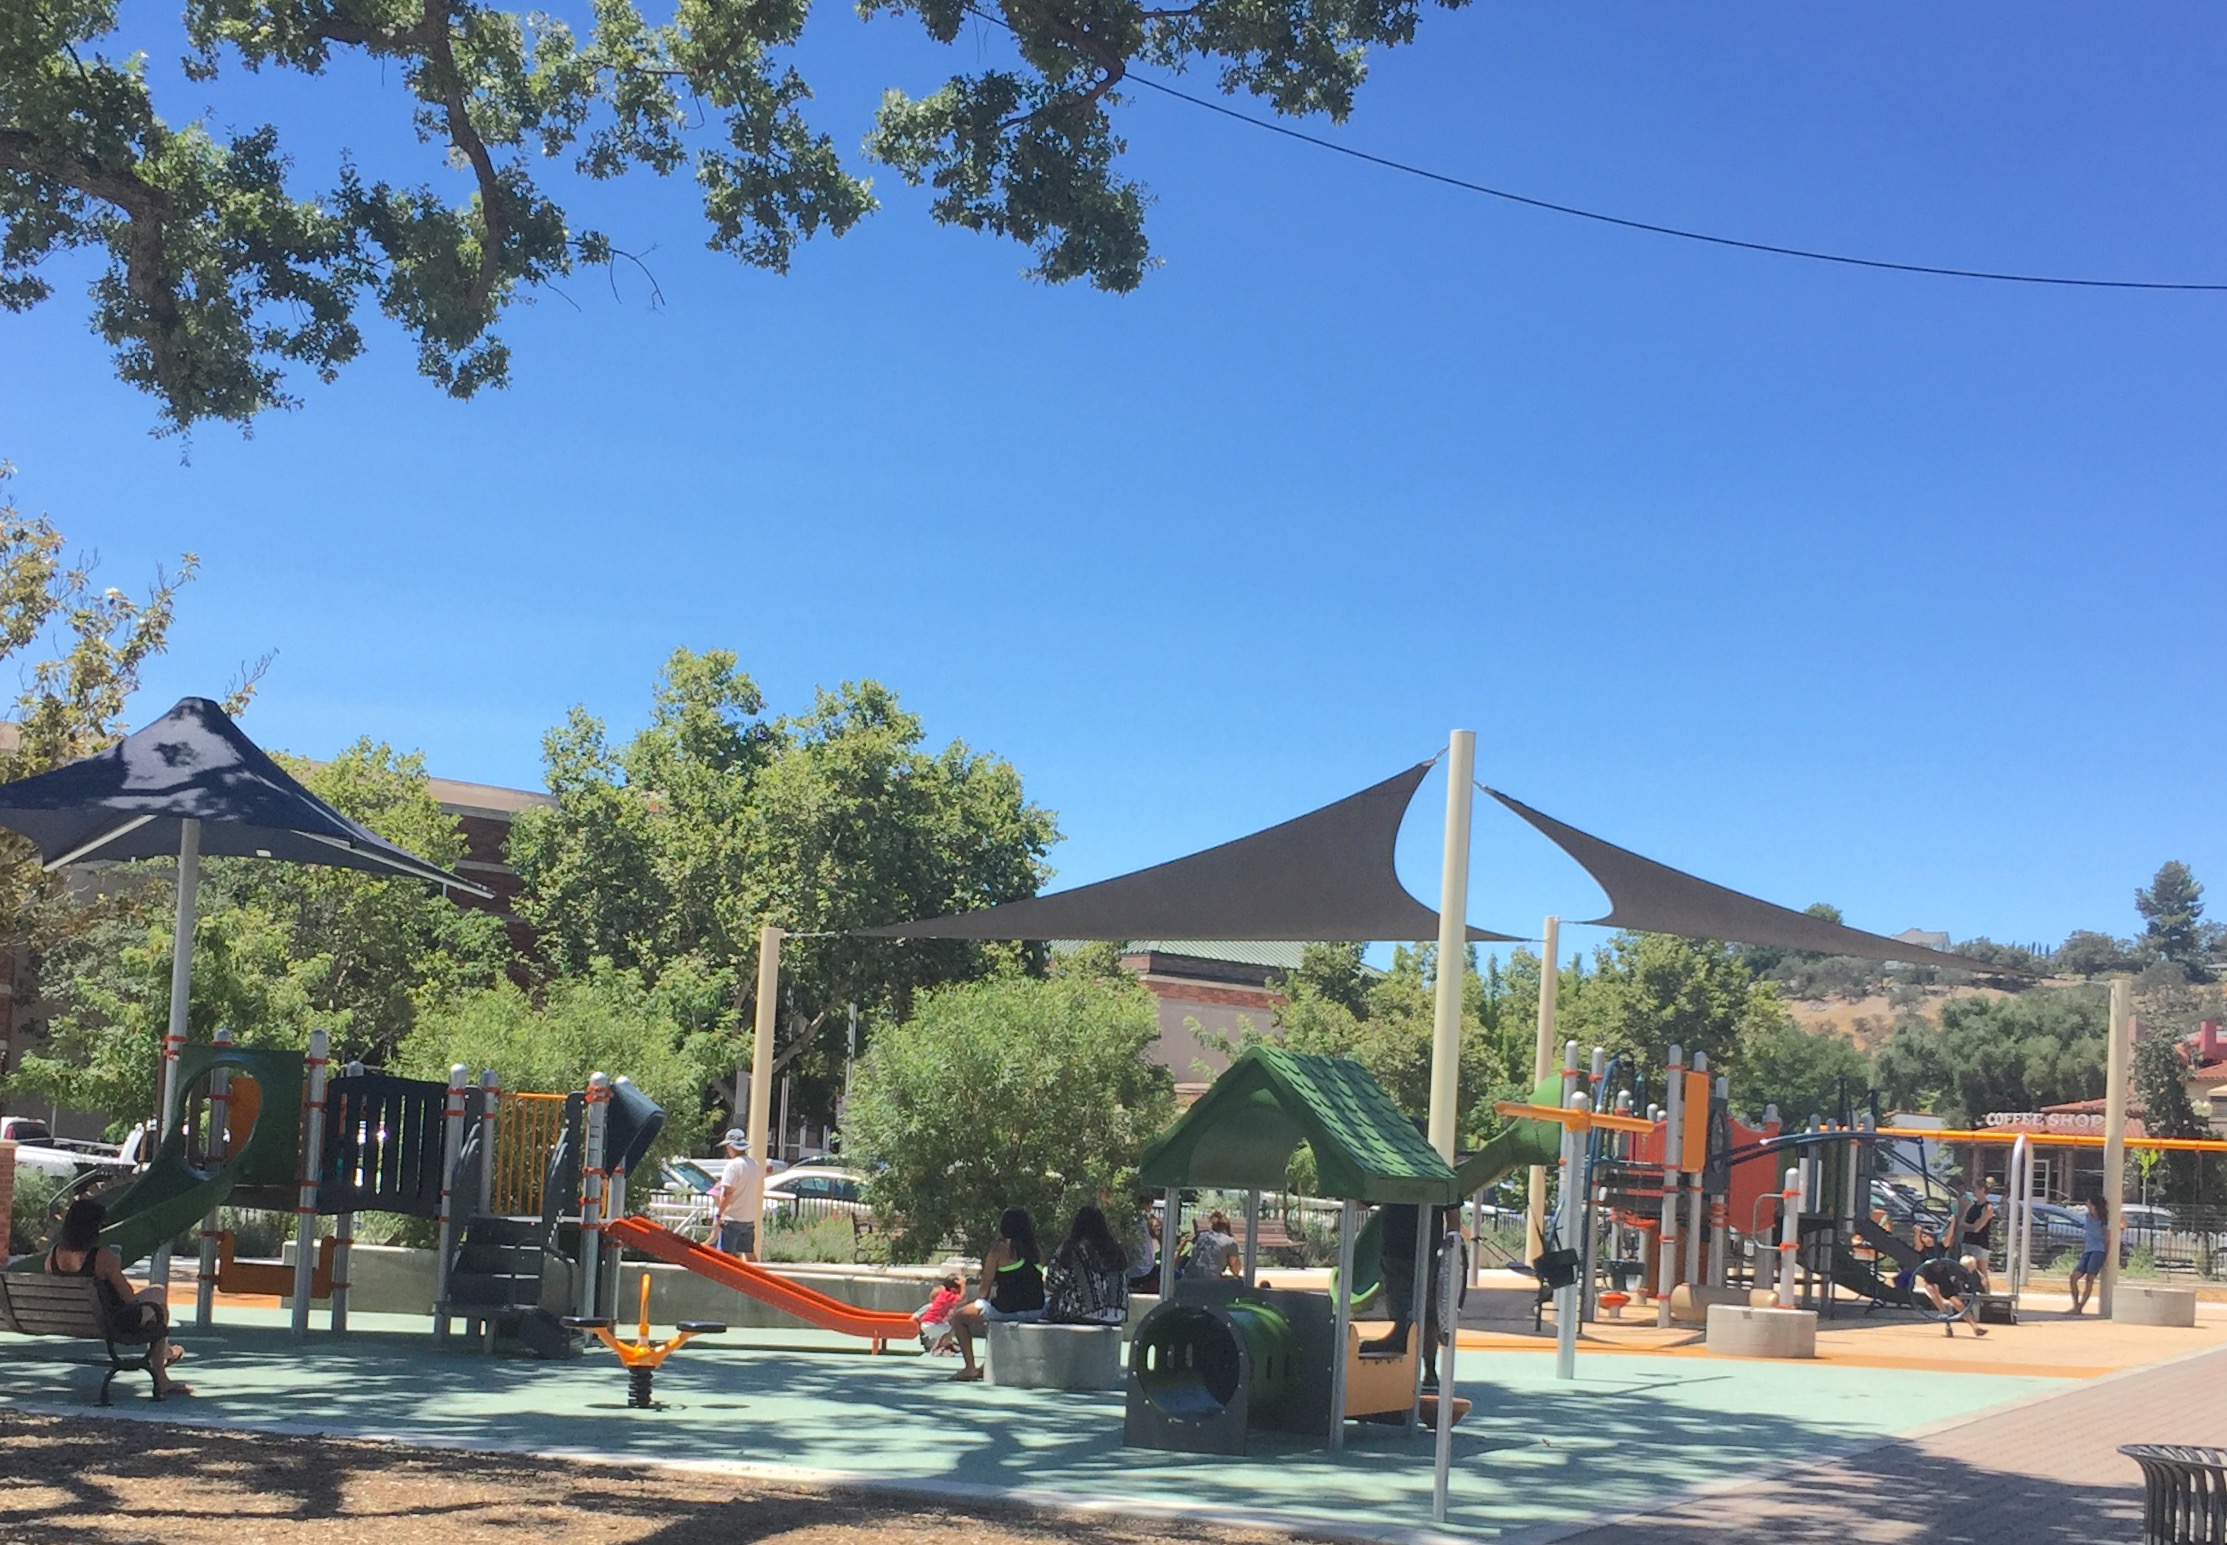 Downtown City Park Playground has shade in Paso Robles California